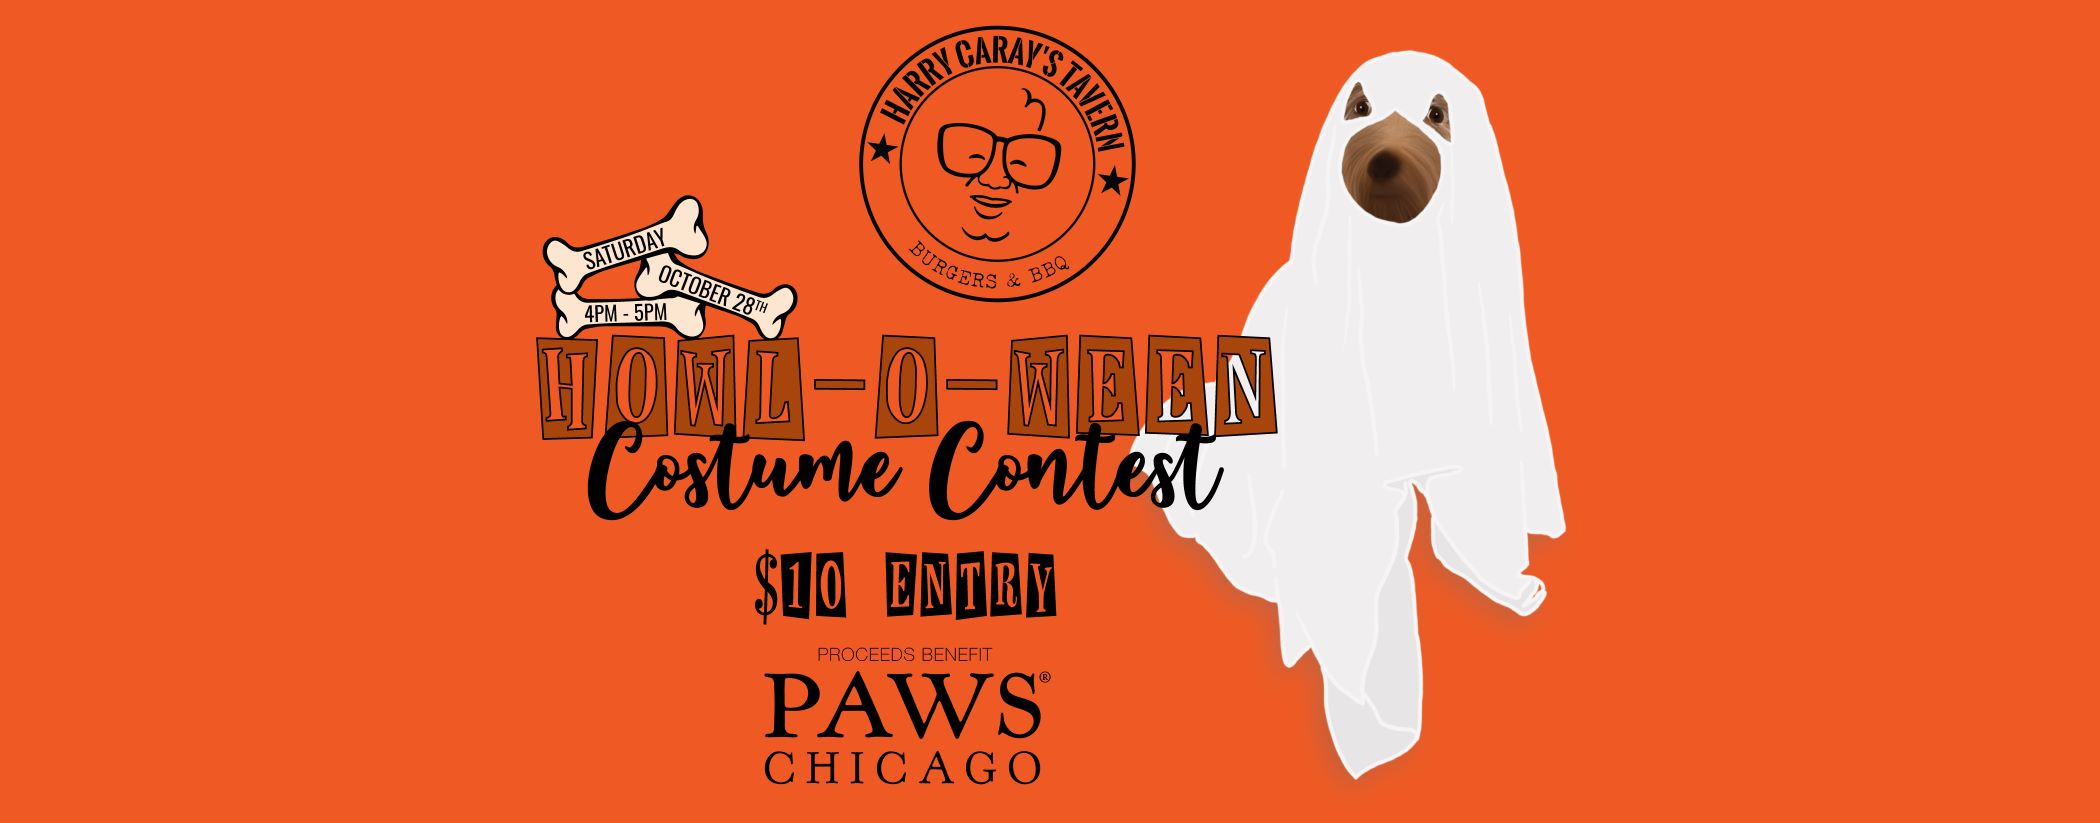 Howloween at Harry Caray's Tavern at Navy Pier Wide Graphic